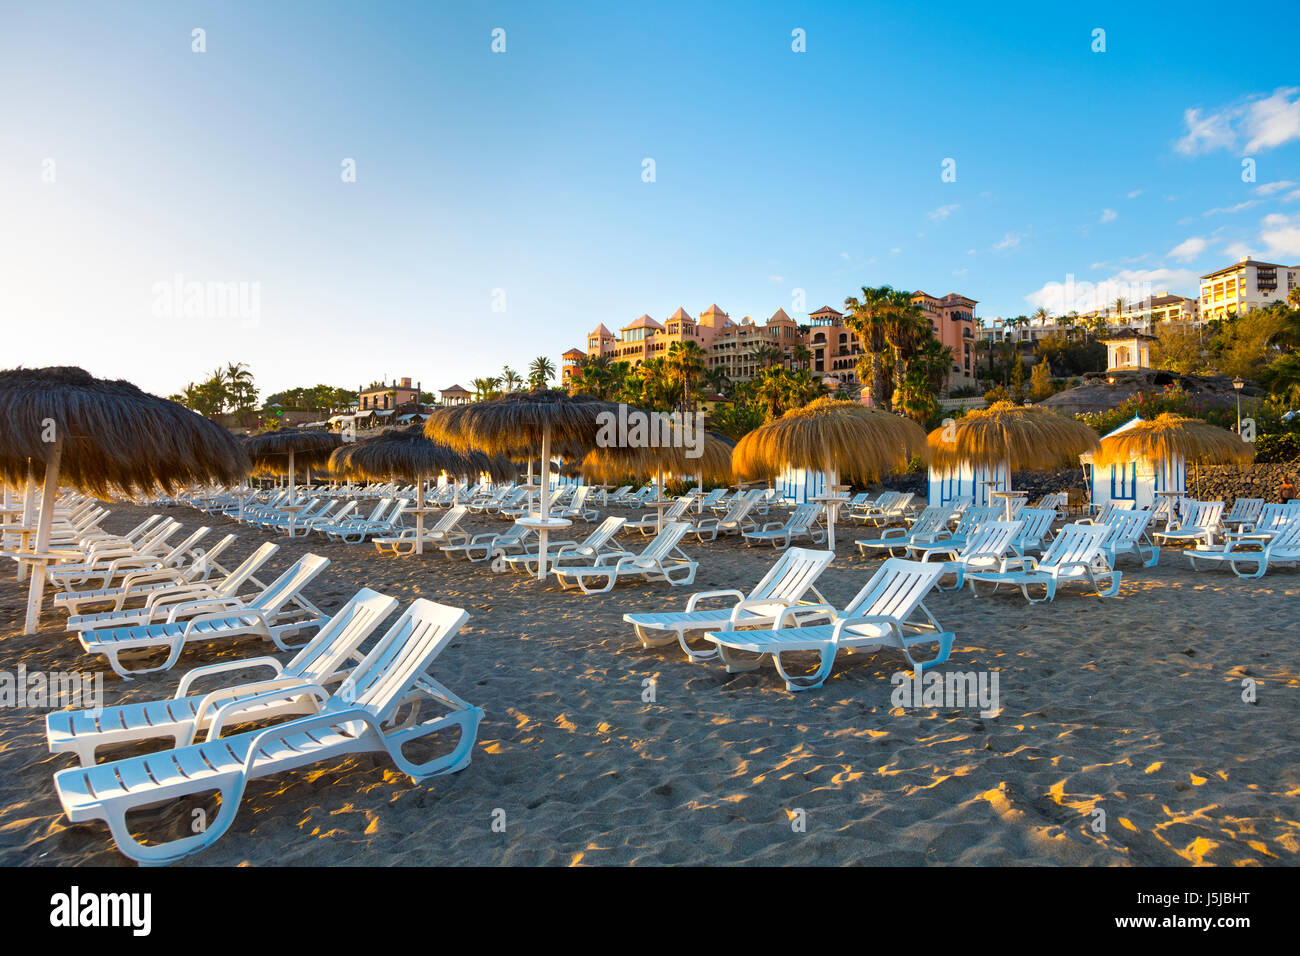 Sun loungers and straw parasols at Playa del Duque beach in Costa Adeje, Tenerife, Spain Stock Photo